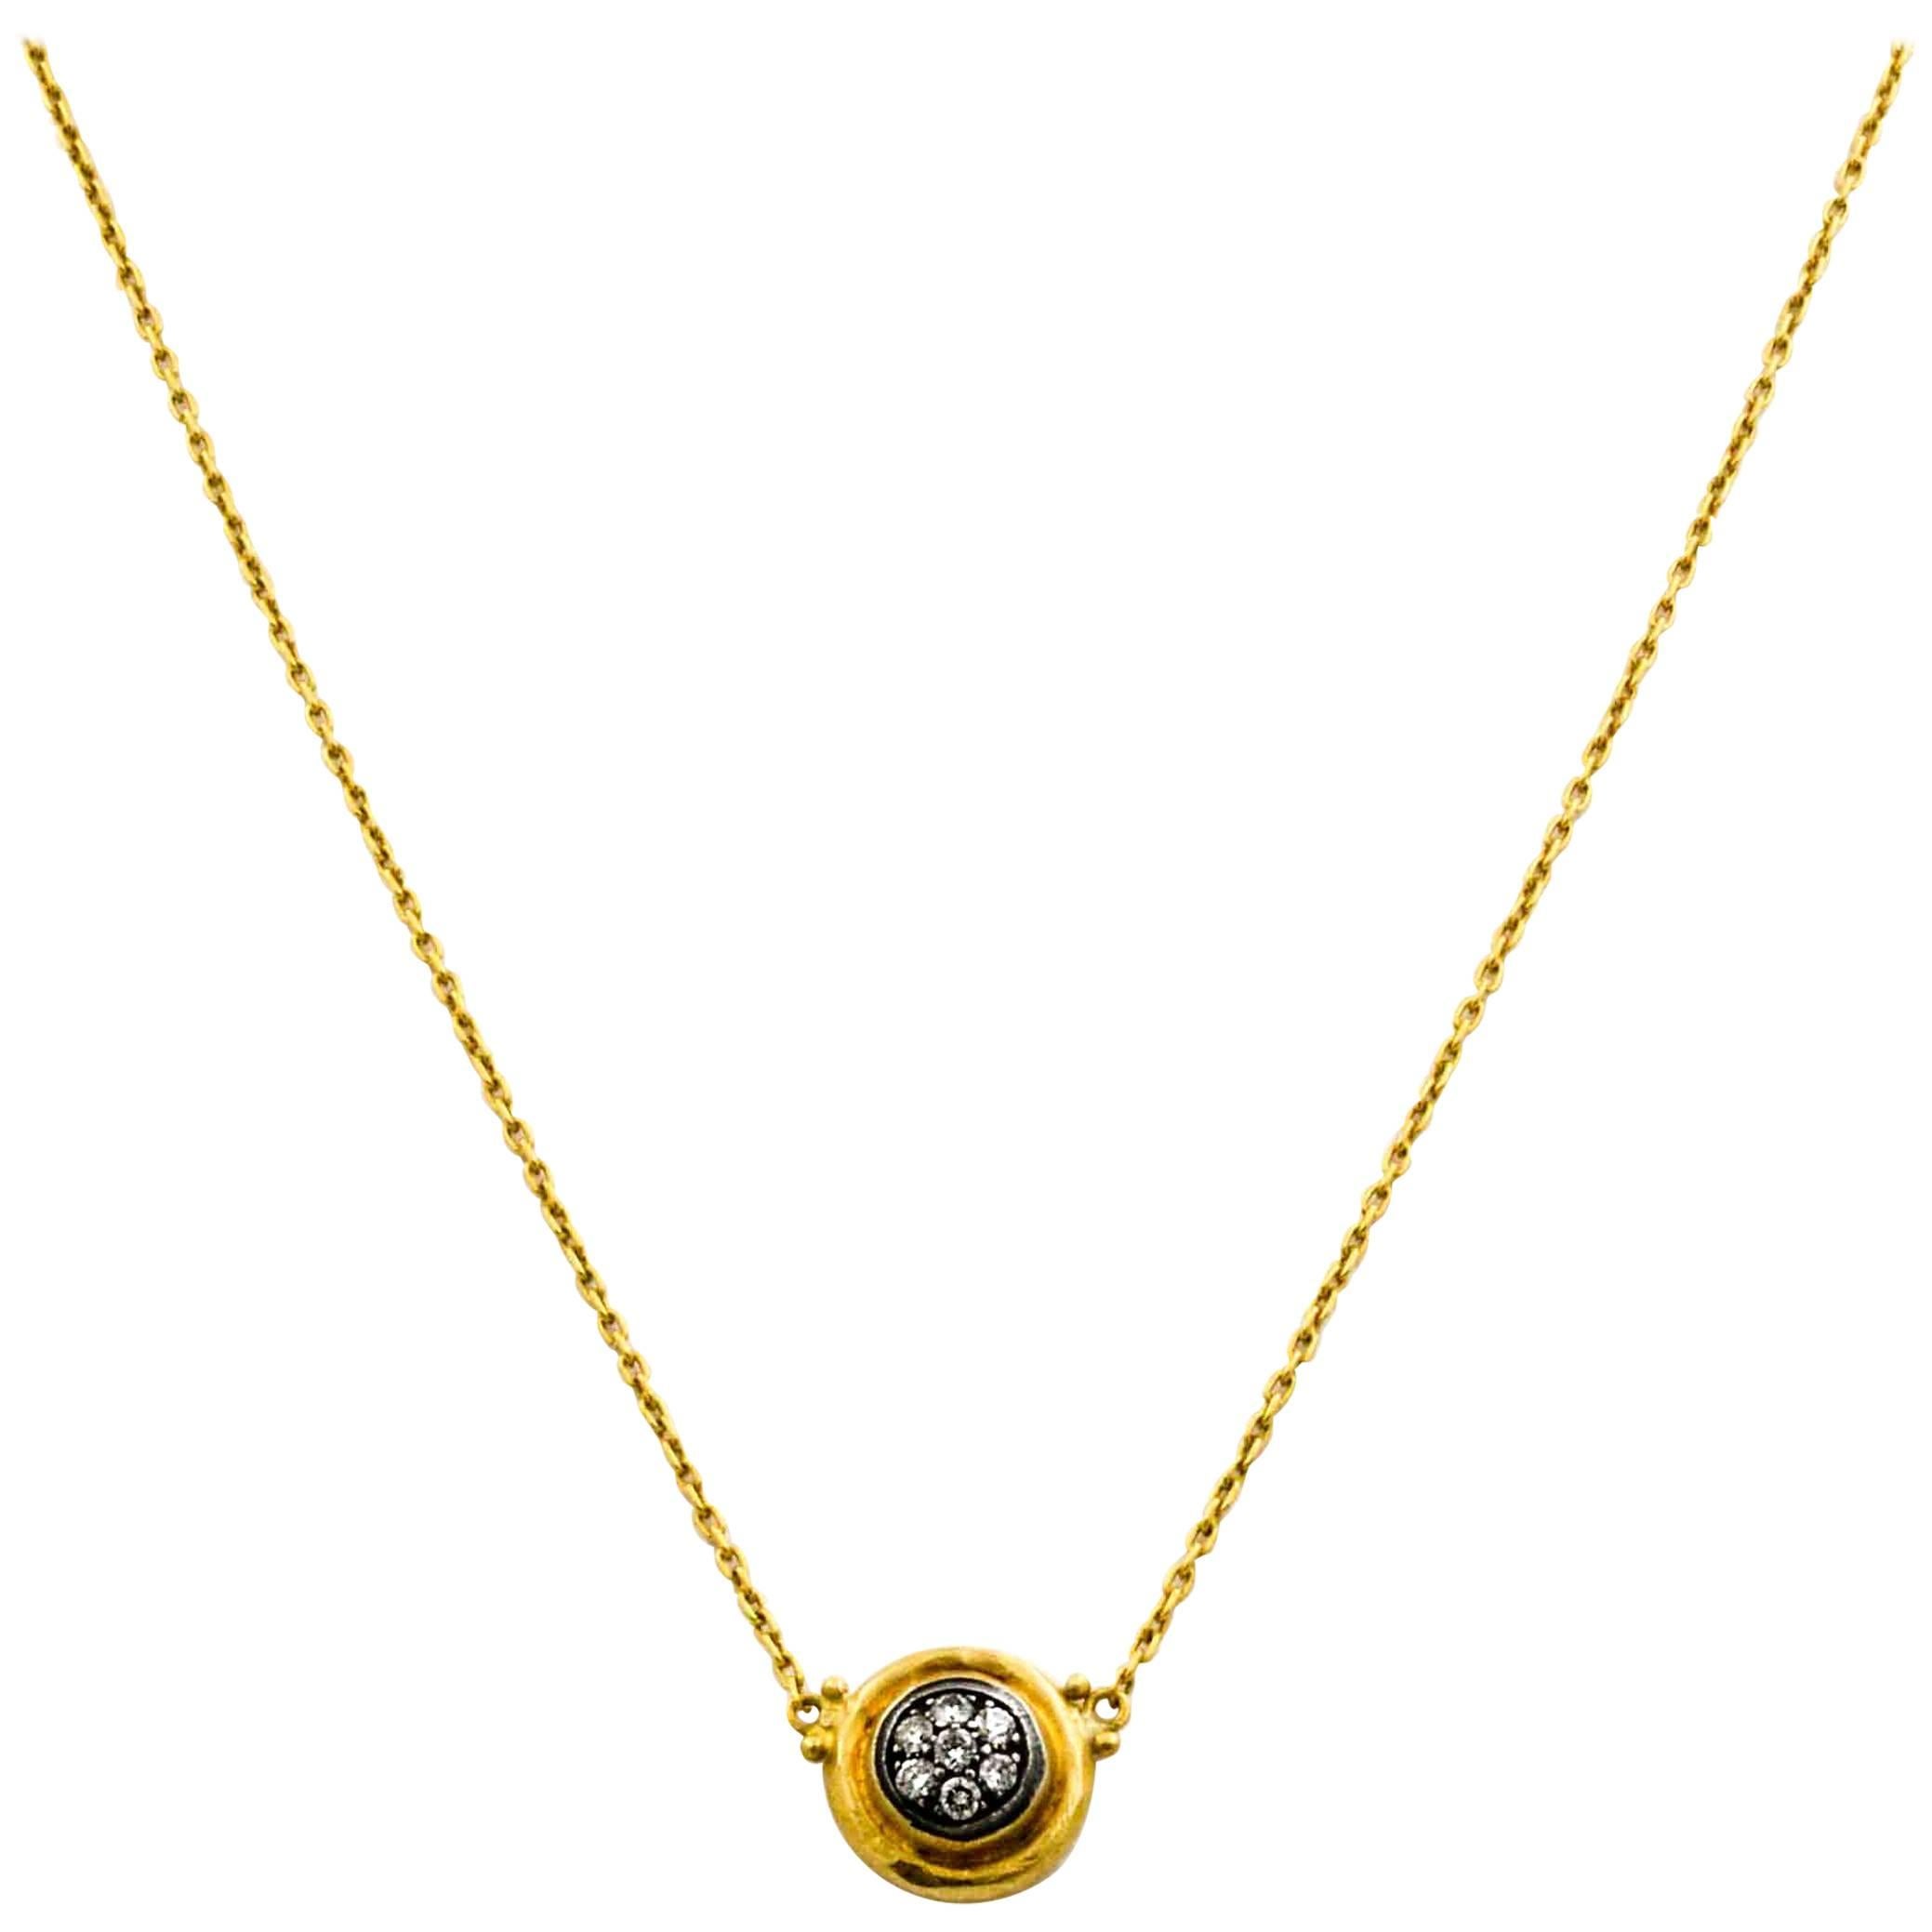 Lika Beha 24 K Yellow Gold Necklace with Sterling Silver, 0.24 Carat Diamonds